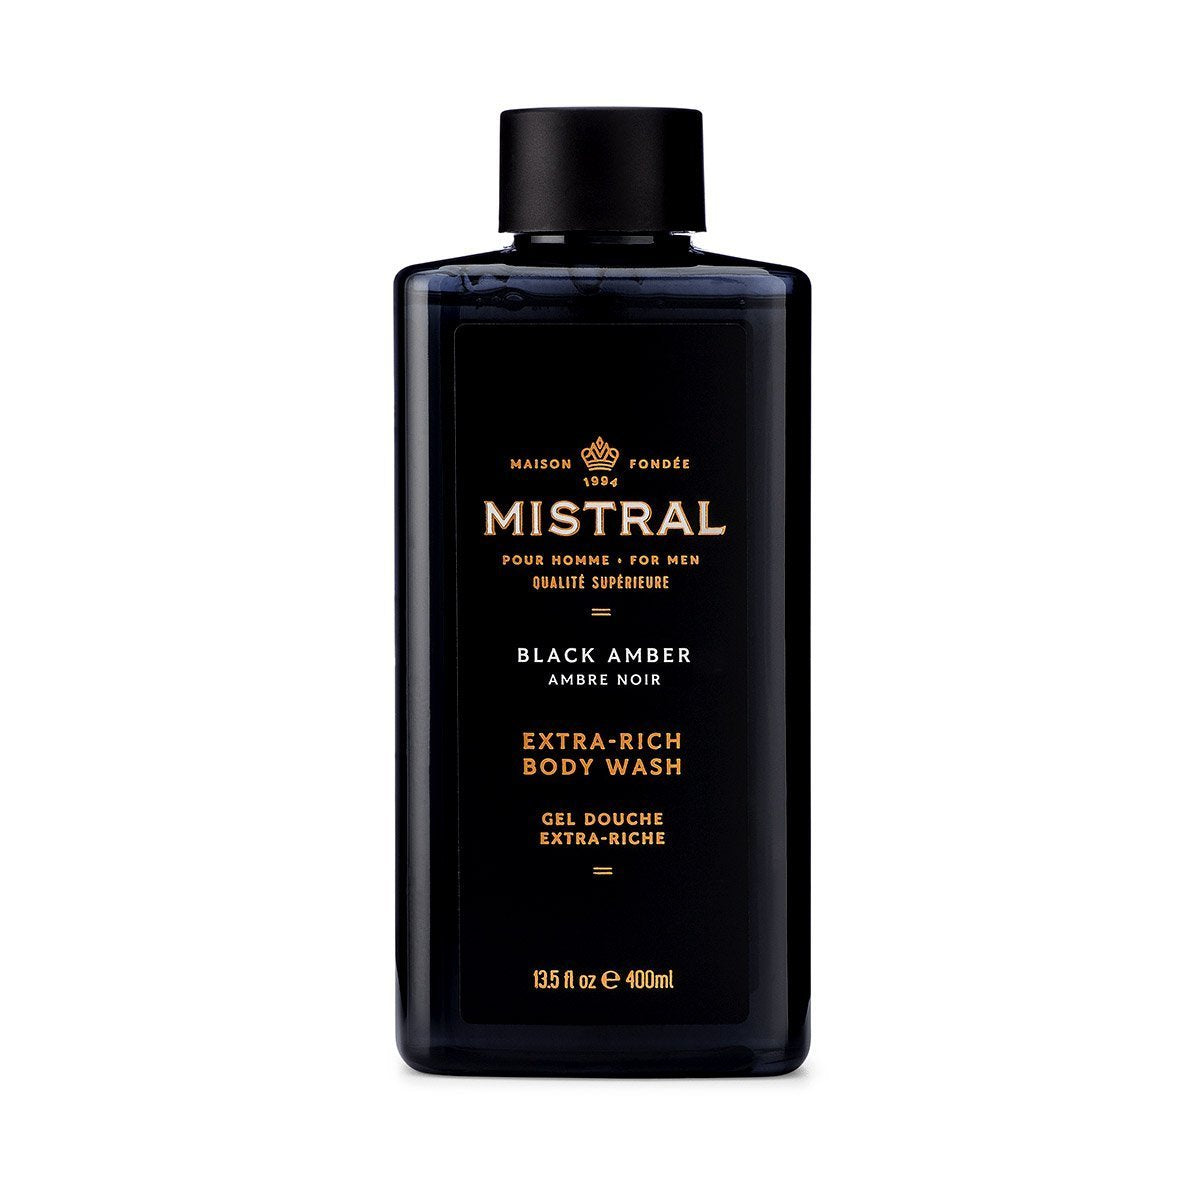 Mistral - Body and Hair Wash for Men